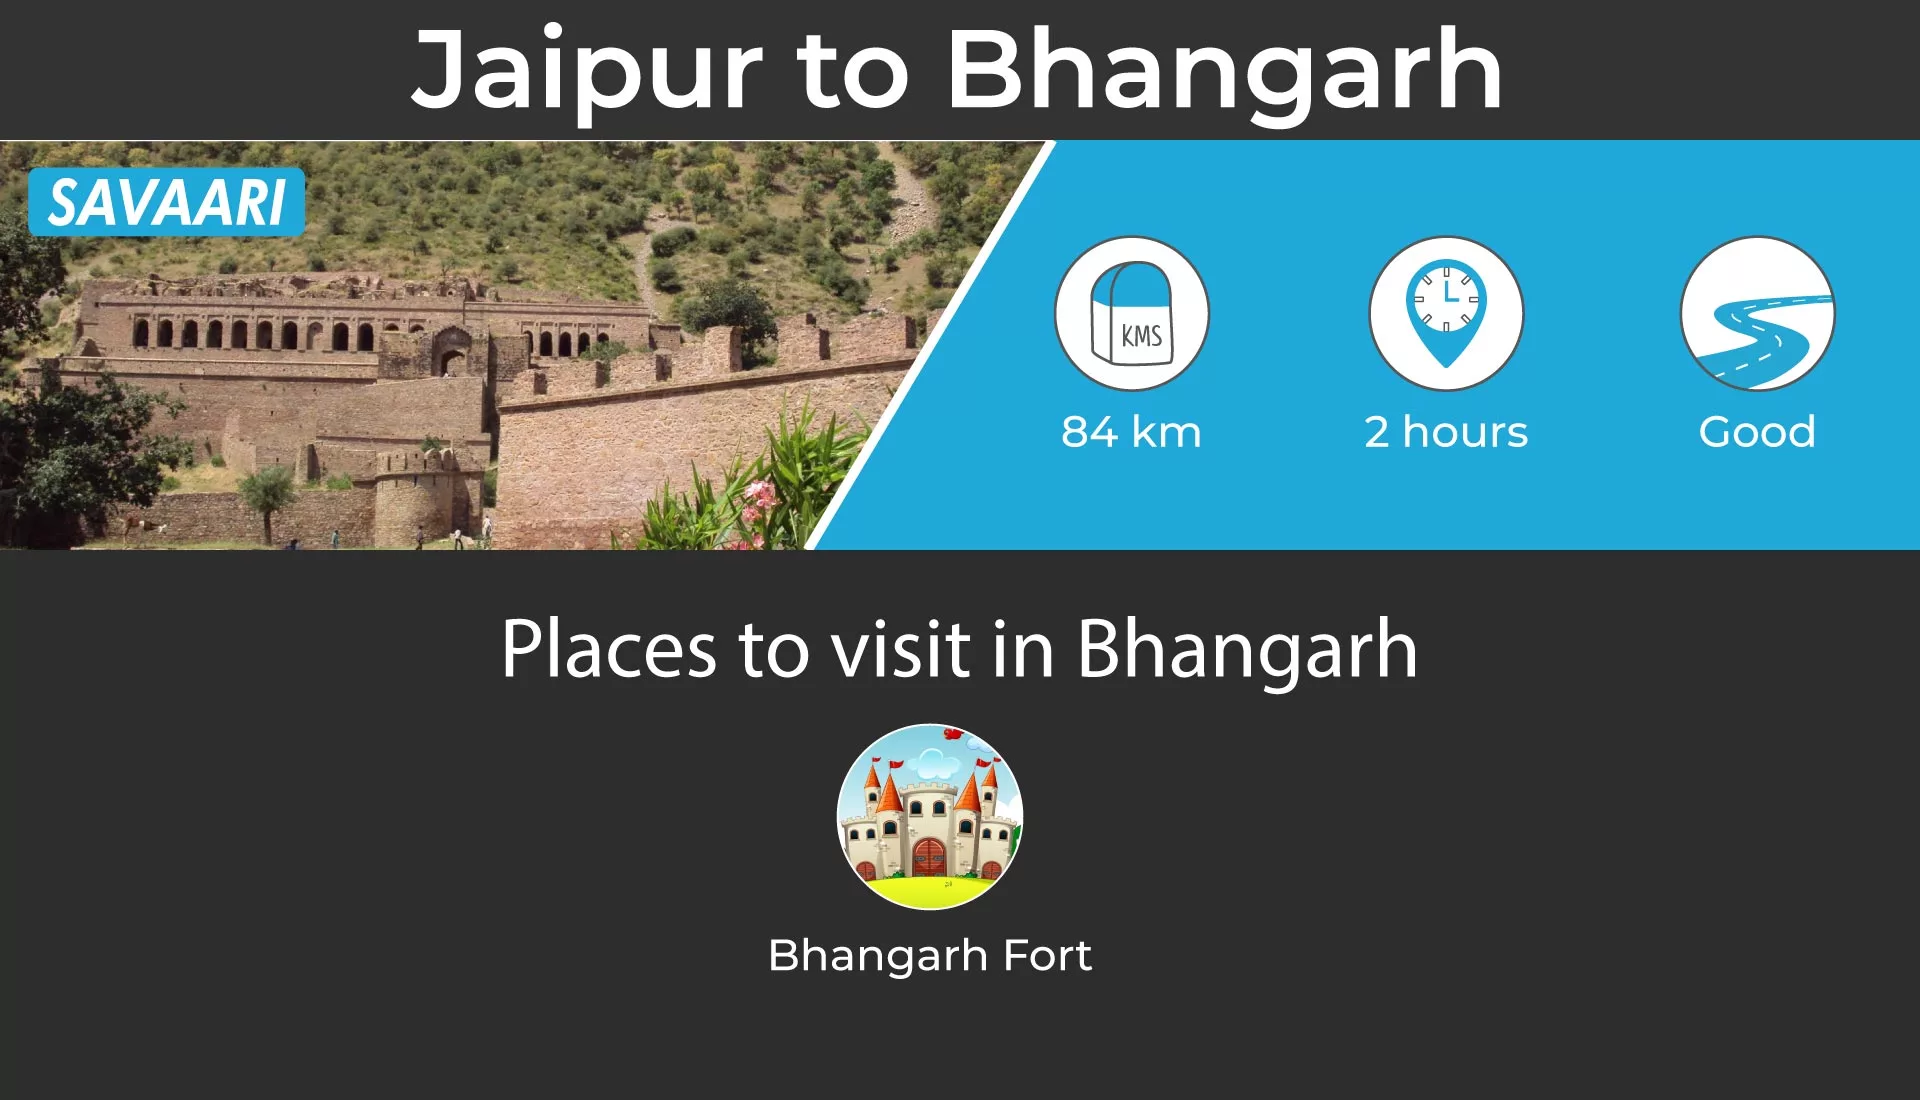 Jaipur by Bhangarh by road